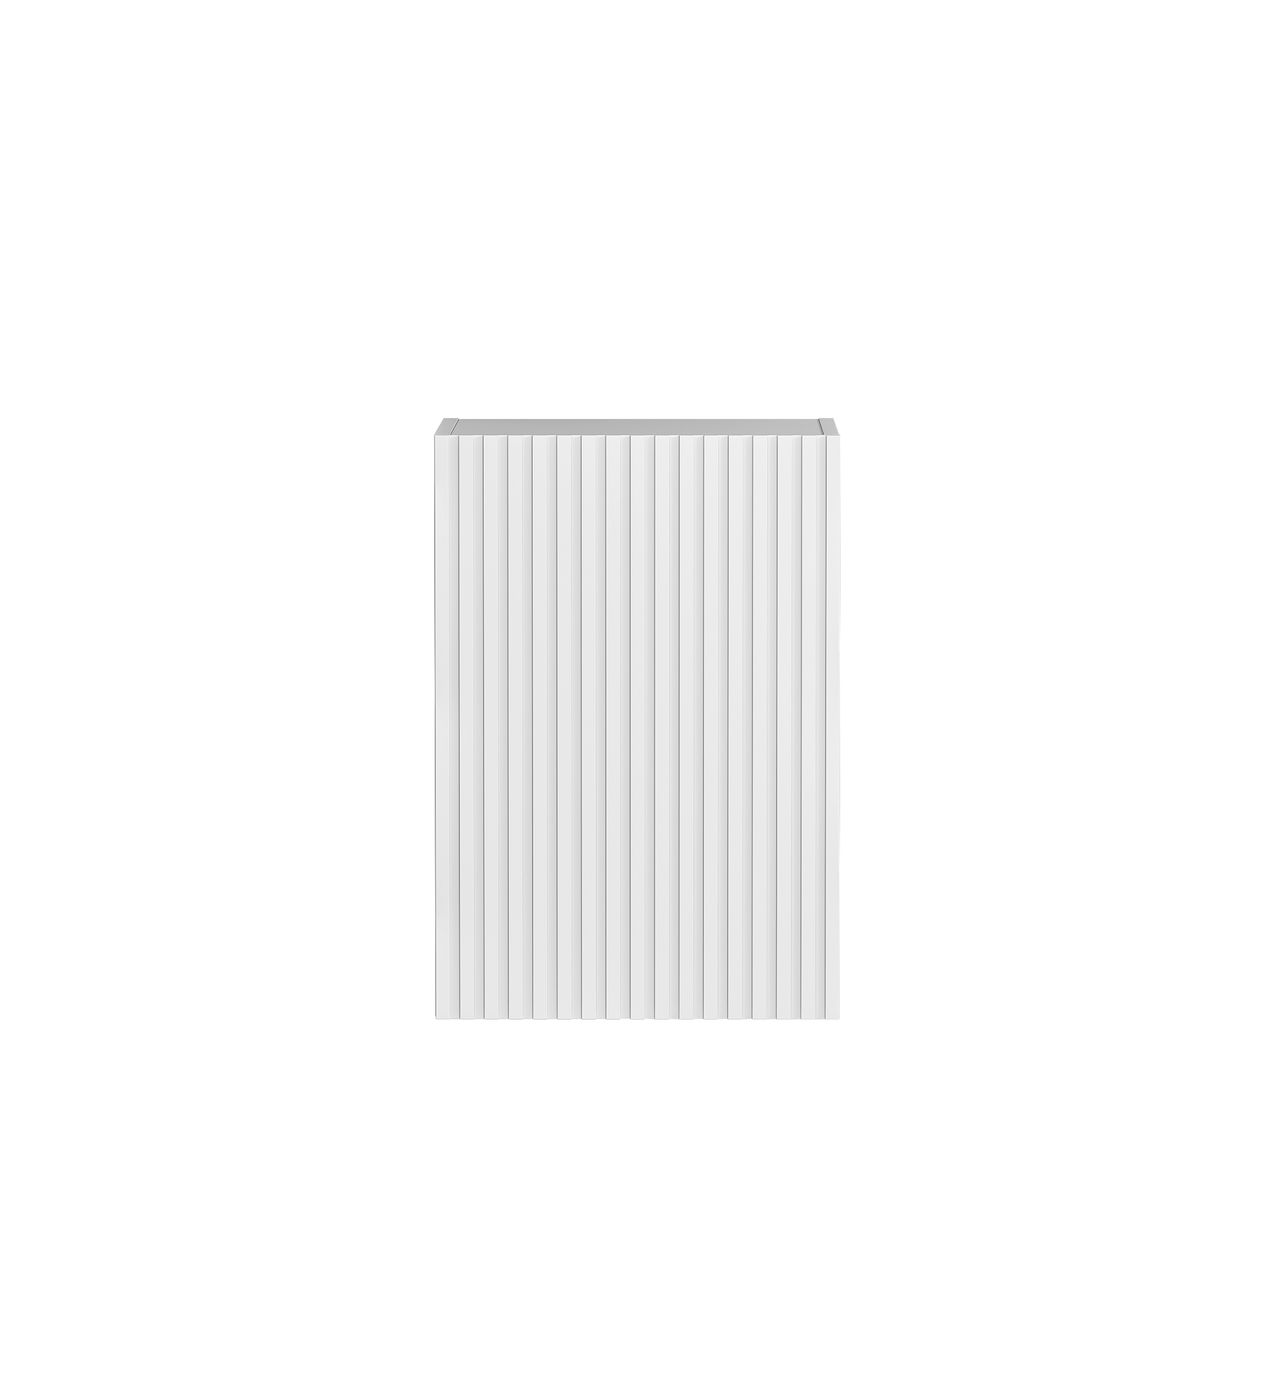 Noosa Laundry 415 Fluted White Wall Cabinet